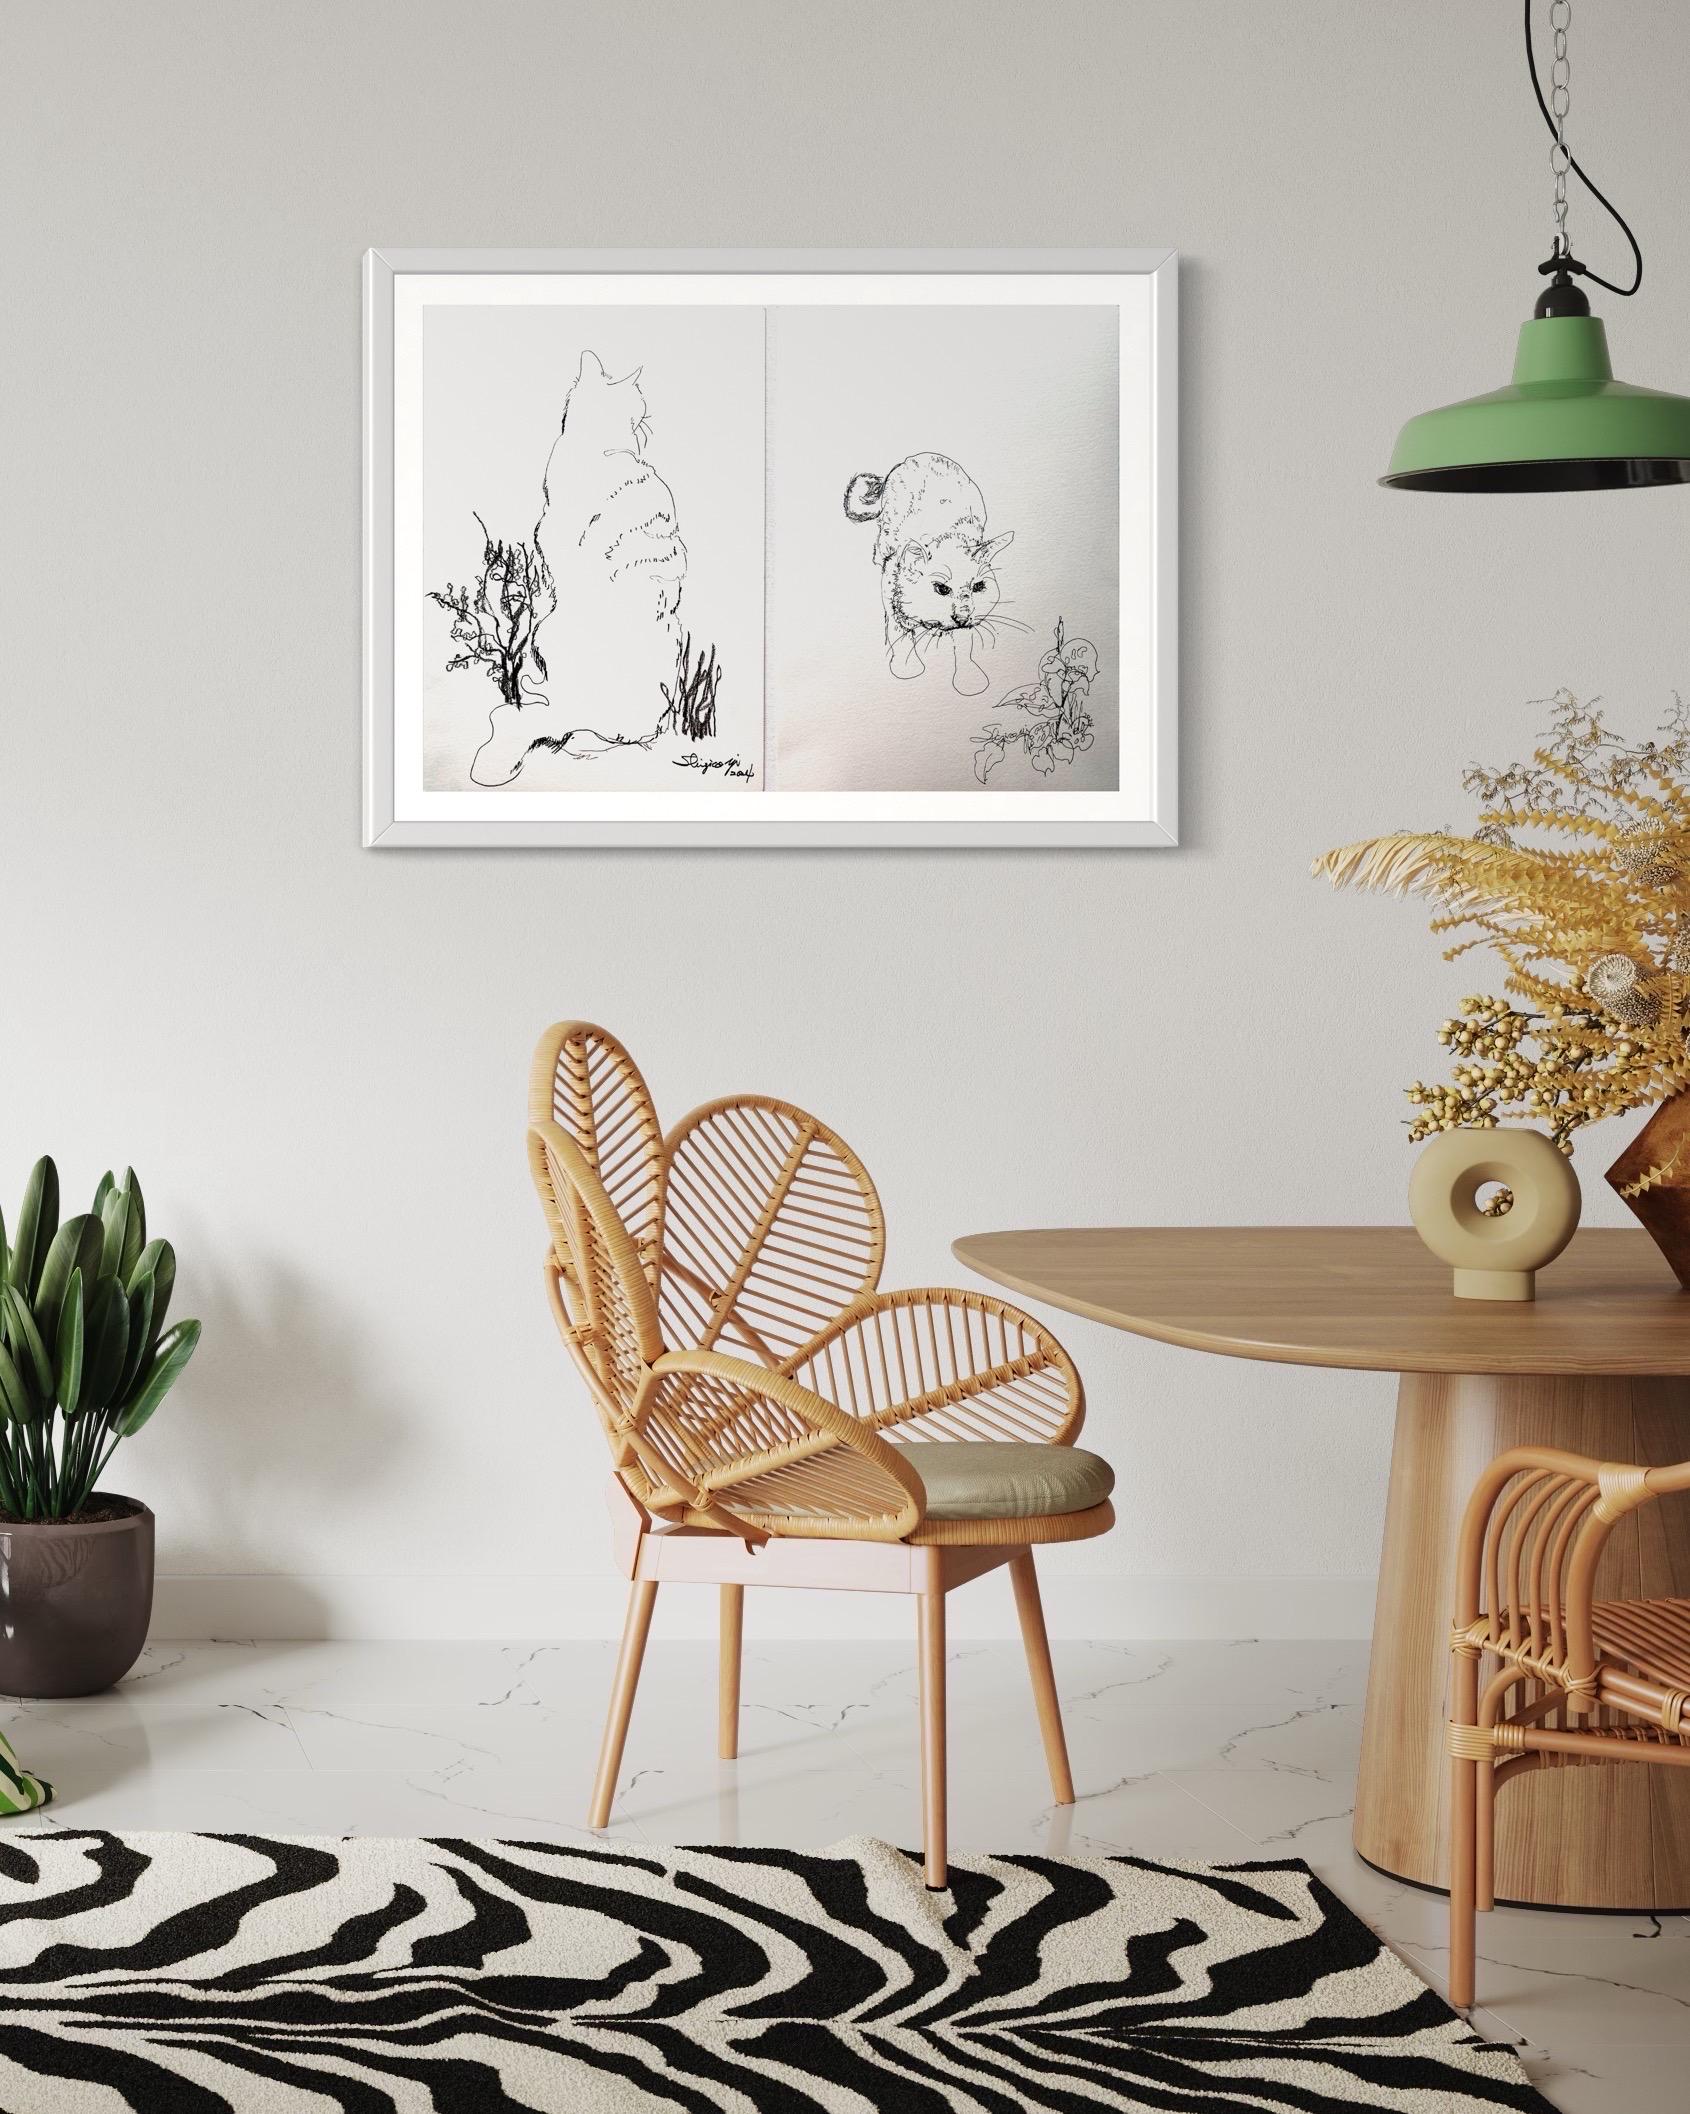 These two drawings as a set, encapsulate the enchanting moments experienced during a series of breakfasts at Shizico Yi's Scotland home. Created plein air and in situ, these scenes unfold over consecutive mornings, with Shizico's cherished cat as